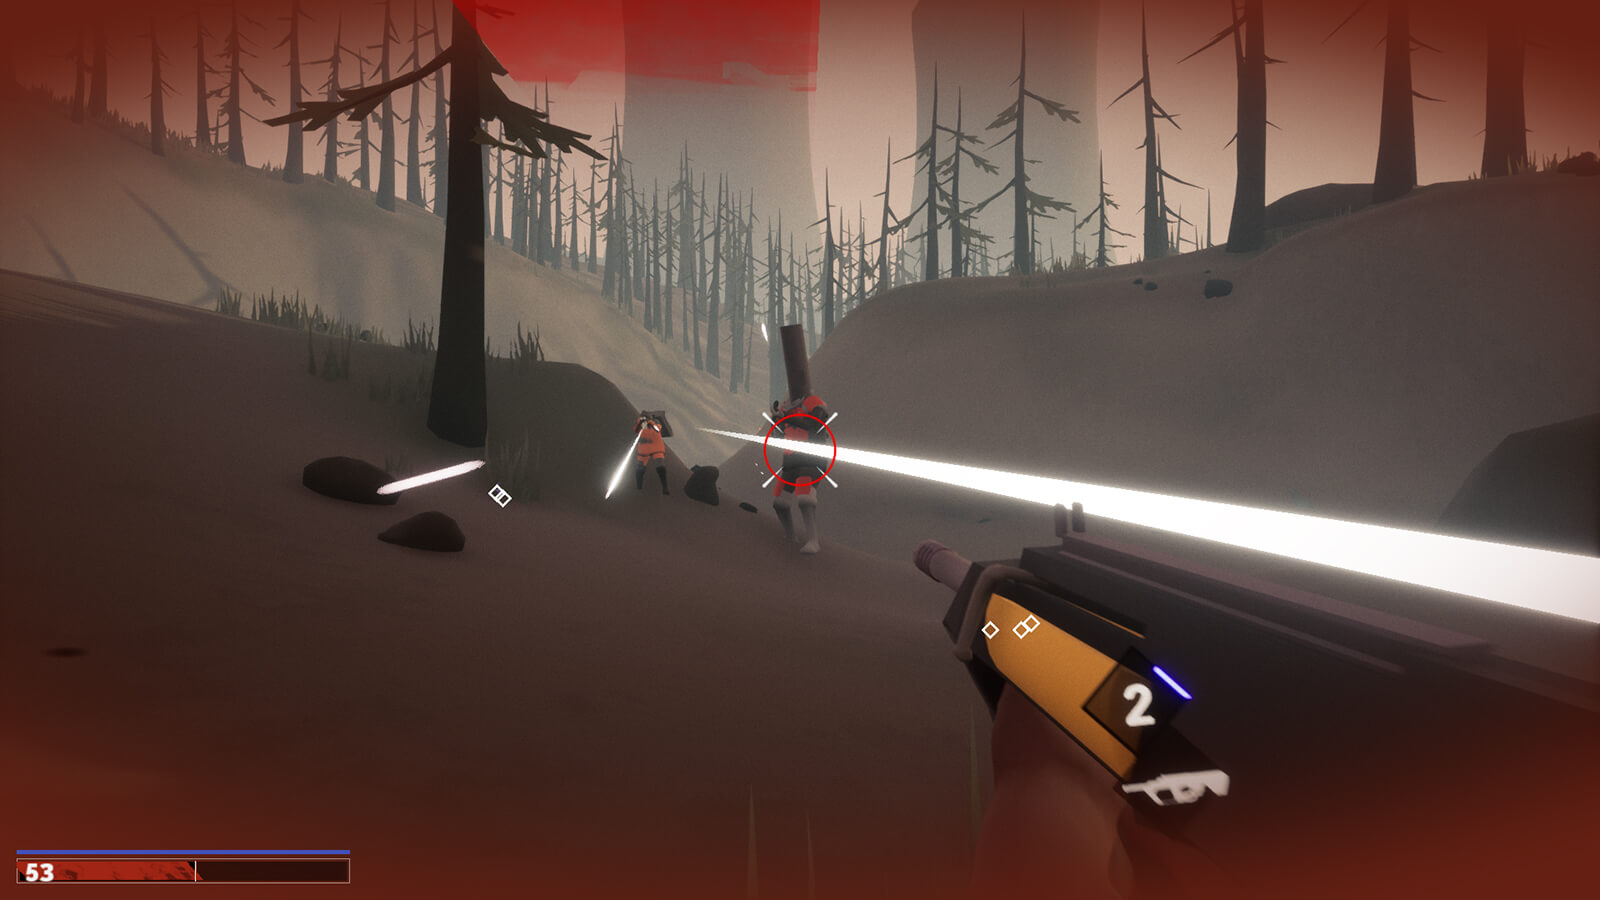 The player blasts two mysterious enemies wearing helmets and space suits with their shotgun. 